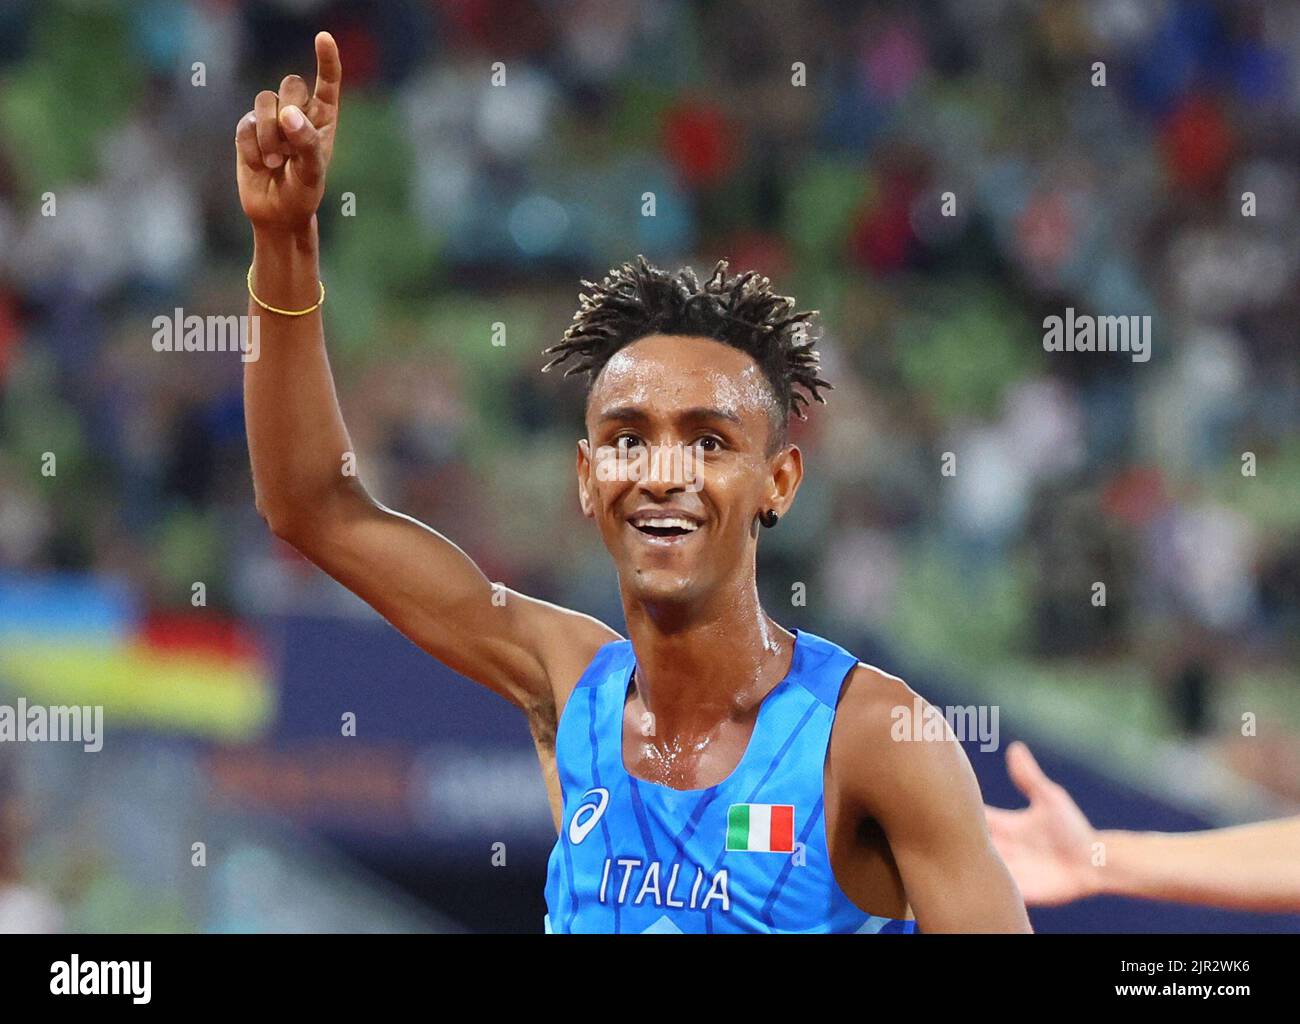 2022 European Championships - Athletics - Olympiastadion, Munich, Germany - August 21, 2022 Italy's Yemaneberhan Crippa celebrates after winning gold in the men's 10,000m final REUTERS/Wolfgang Rattay  REFILE - CORRECTING ID Stock Photo